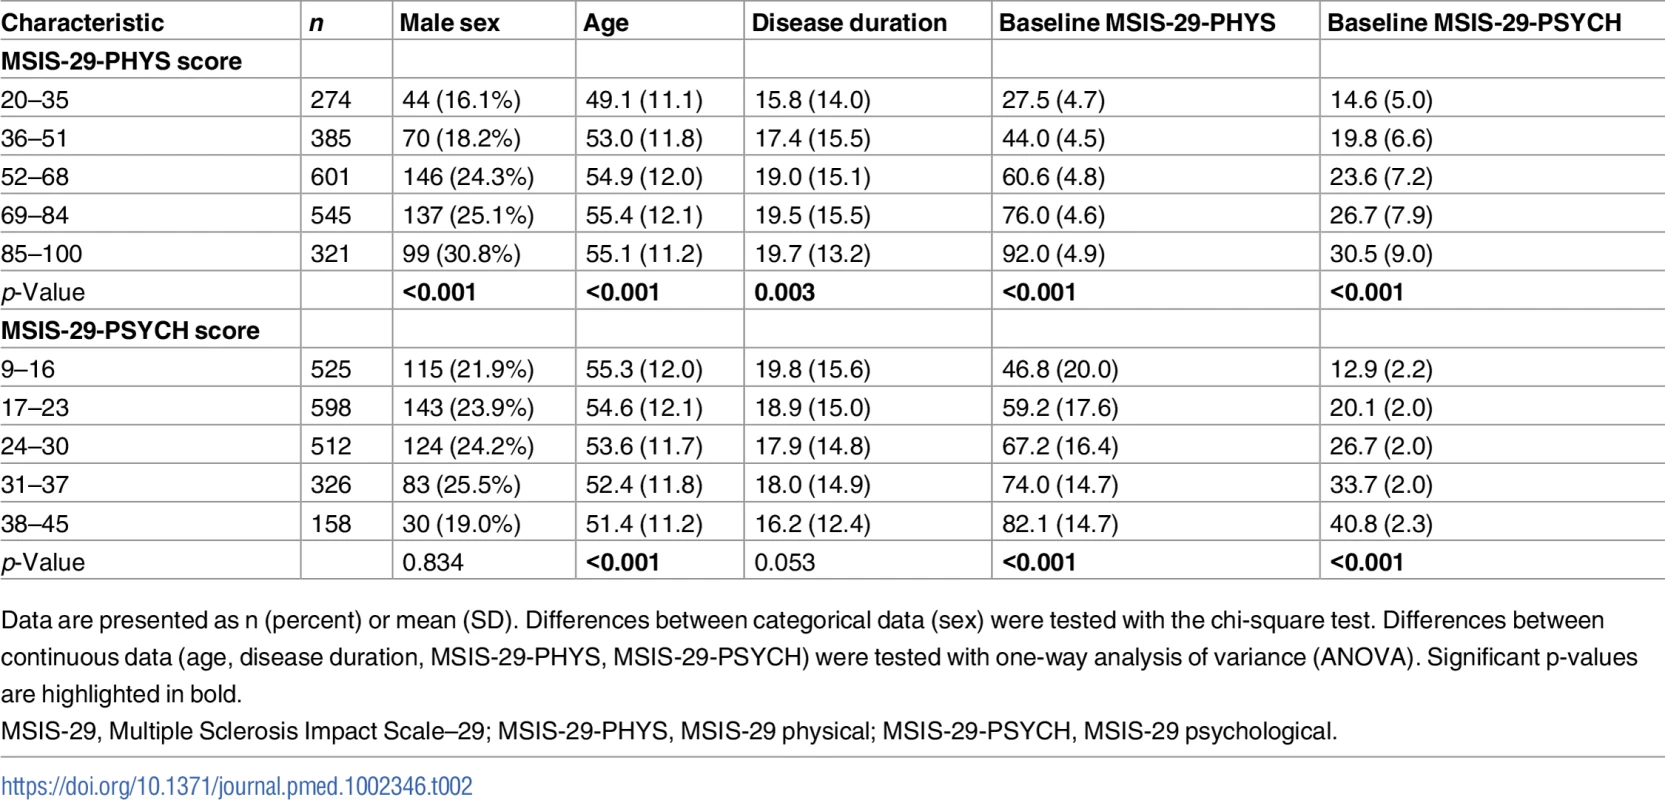 Variation in characteristics between those with different baseline MSIS-29 scores.